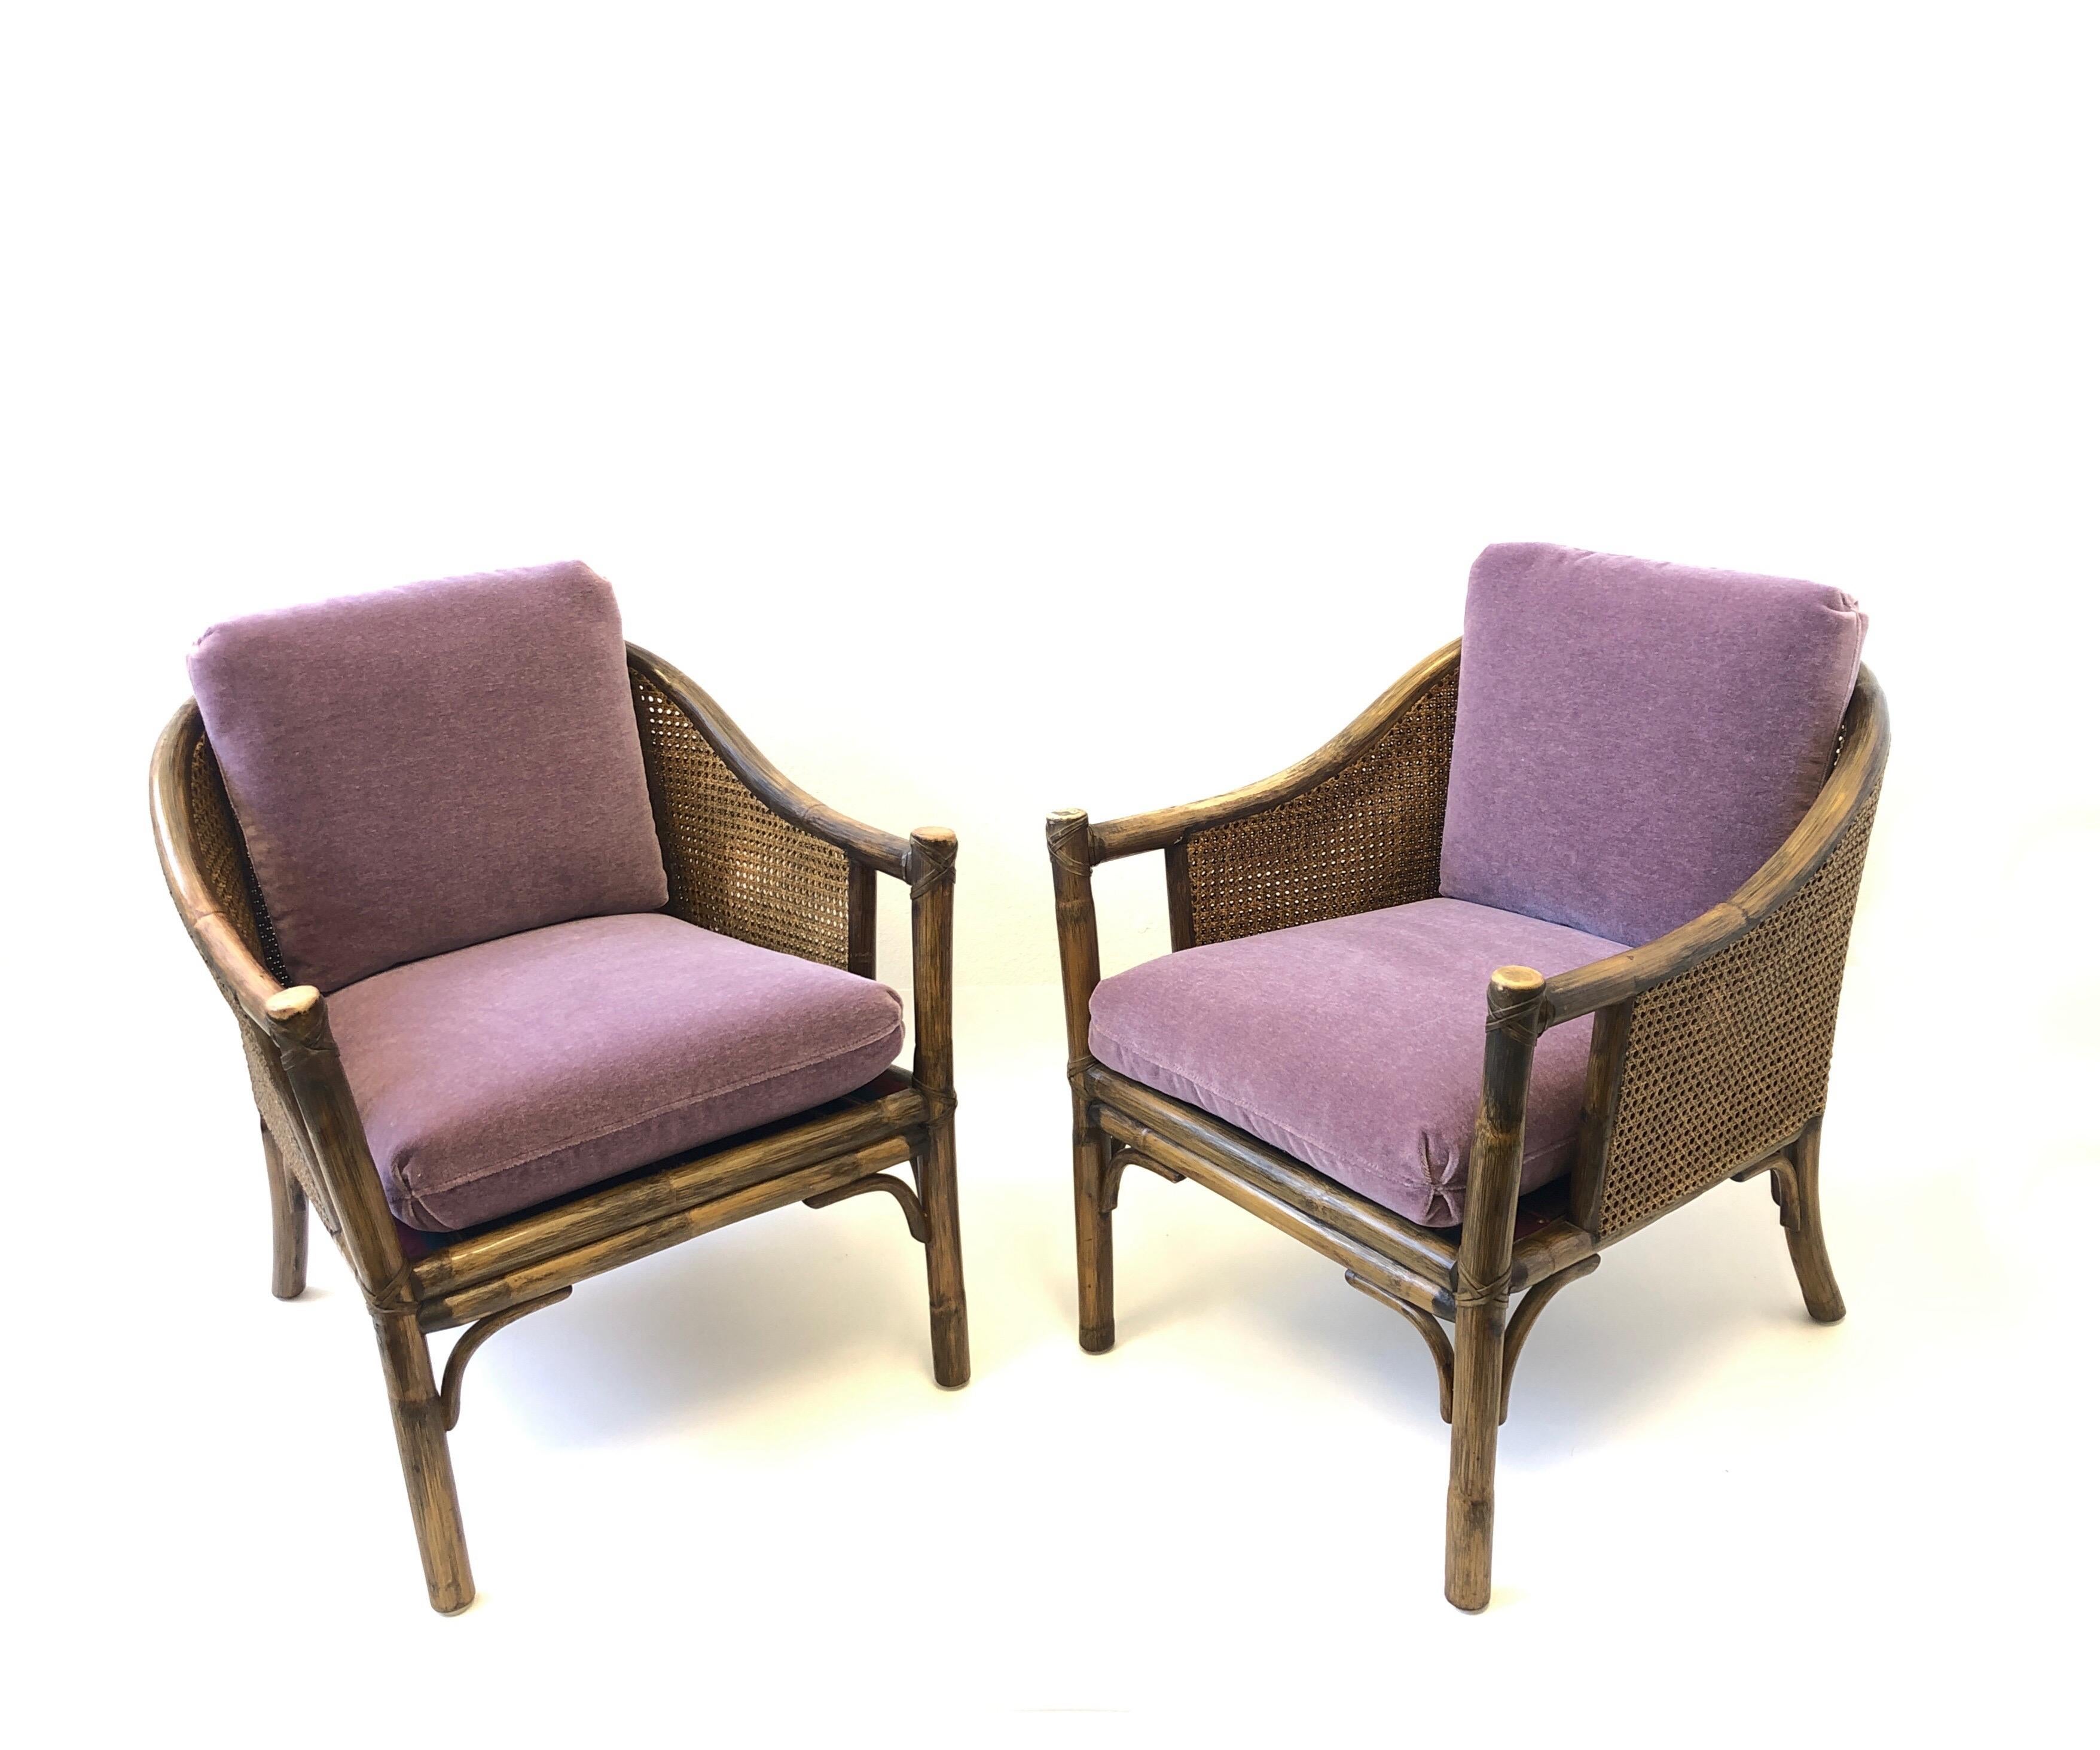 Pair of Bamboo and Cane Lounge Chairs by McGuire 1